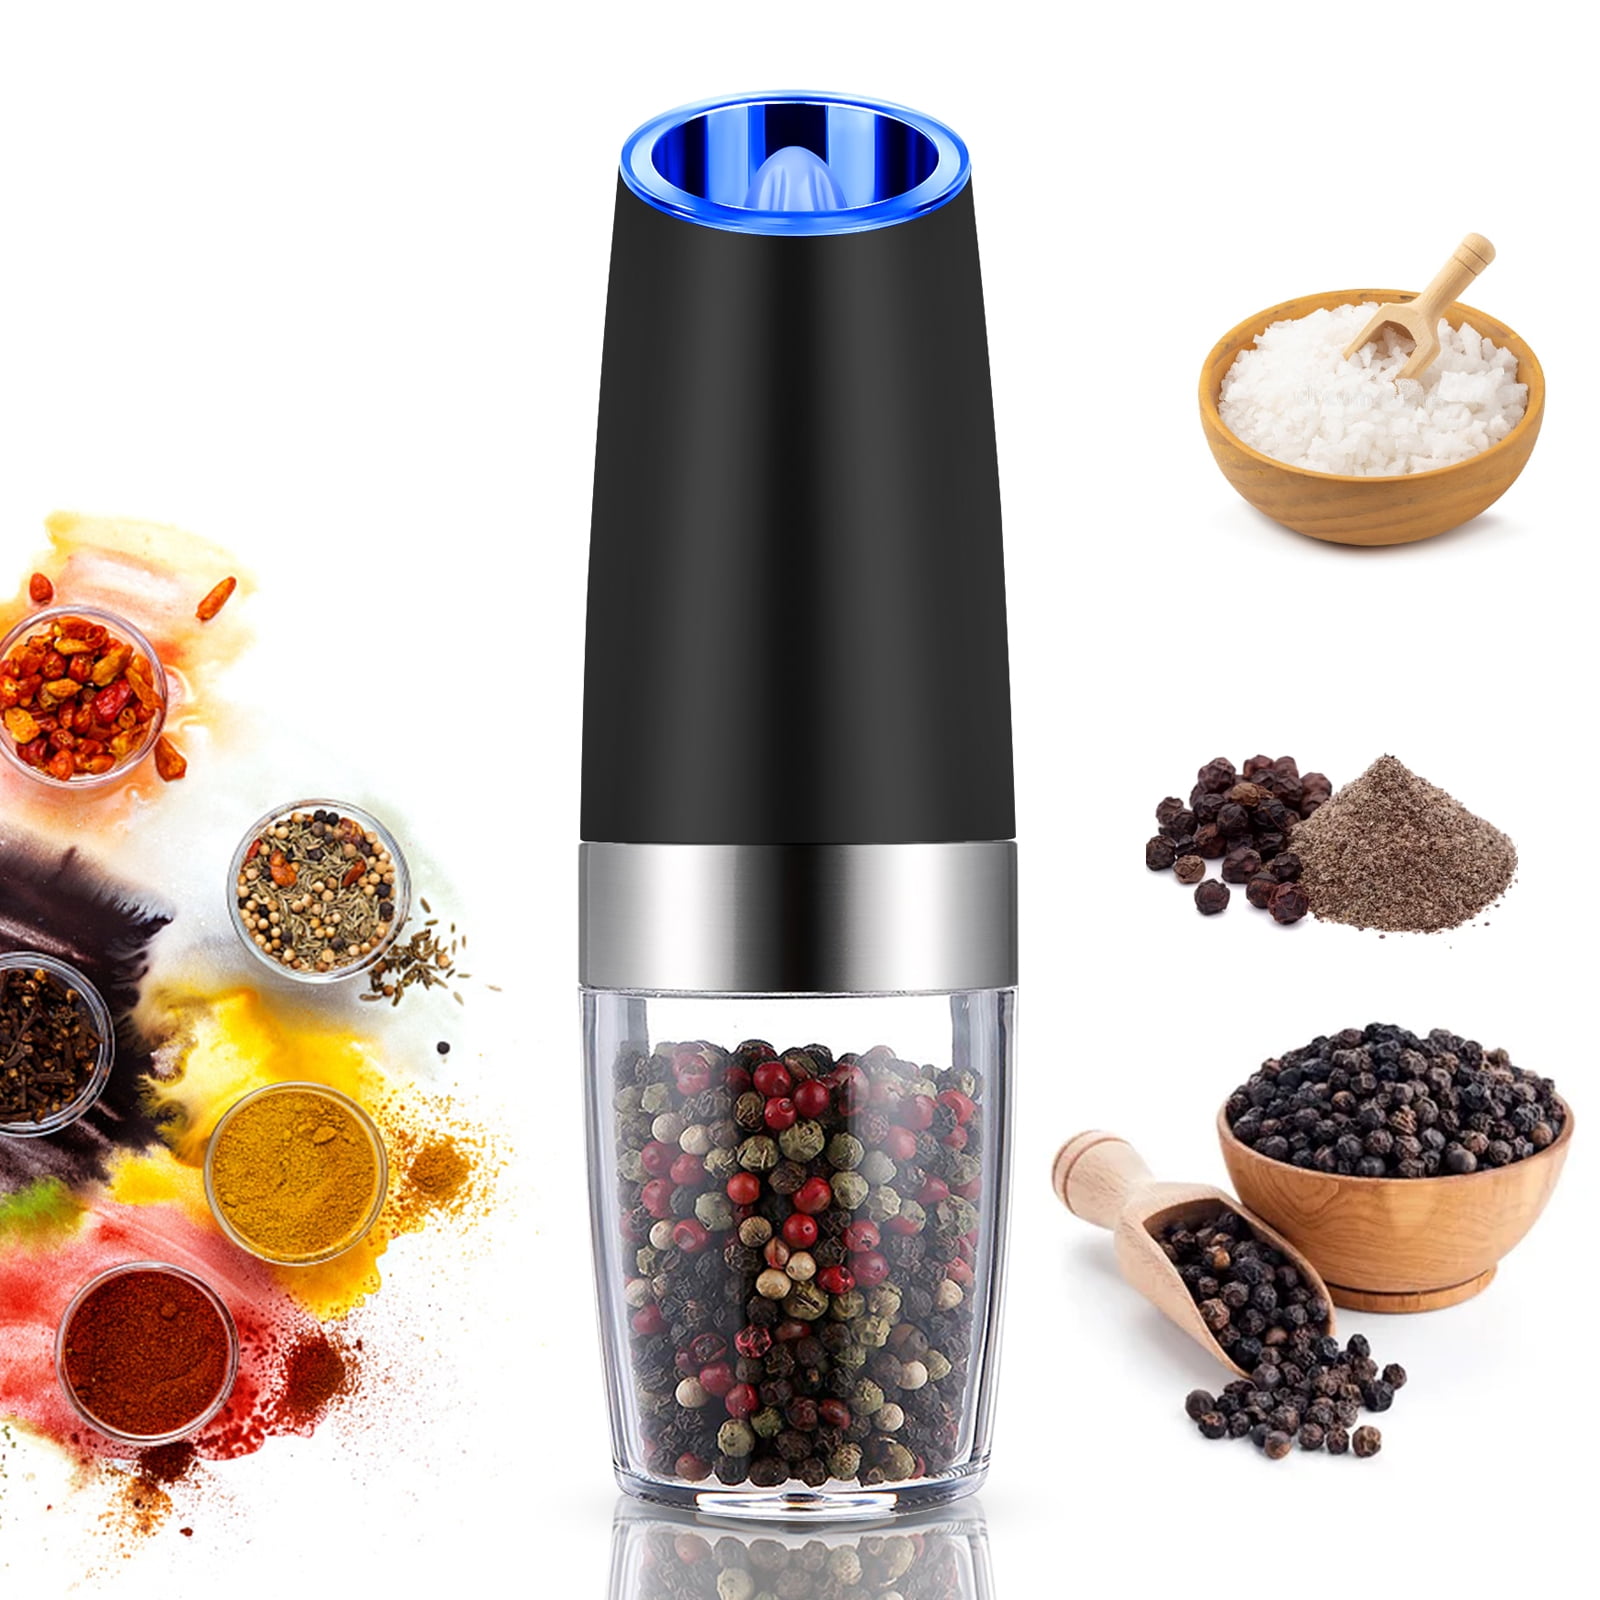 Details about   Salt And Pepper Grinder Set Electric Gravity Operated Non-Slip Soft Grip 2-Piece 